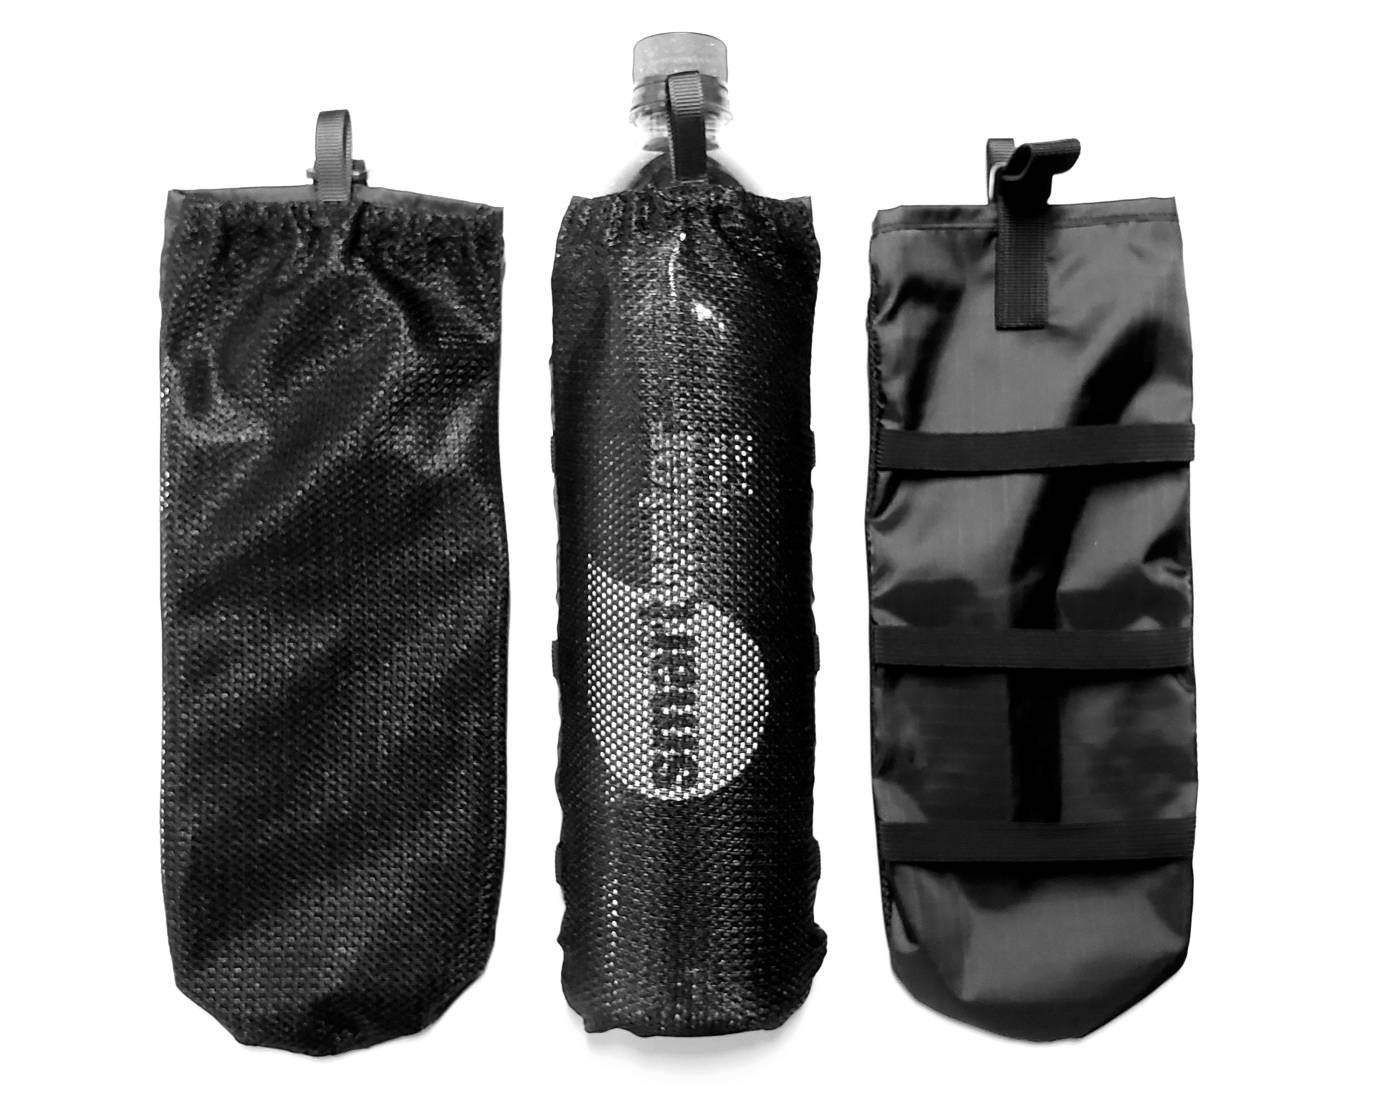  Best Water Bottle Holder – Sling – Pouch - Carrier - Case -  Made of Mesh and Durable Nylon, Water Proof, Light Weight, Comfortable  Shoulder Strap, Fits Most All Universal Water